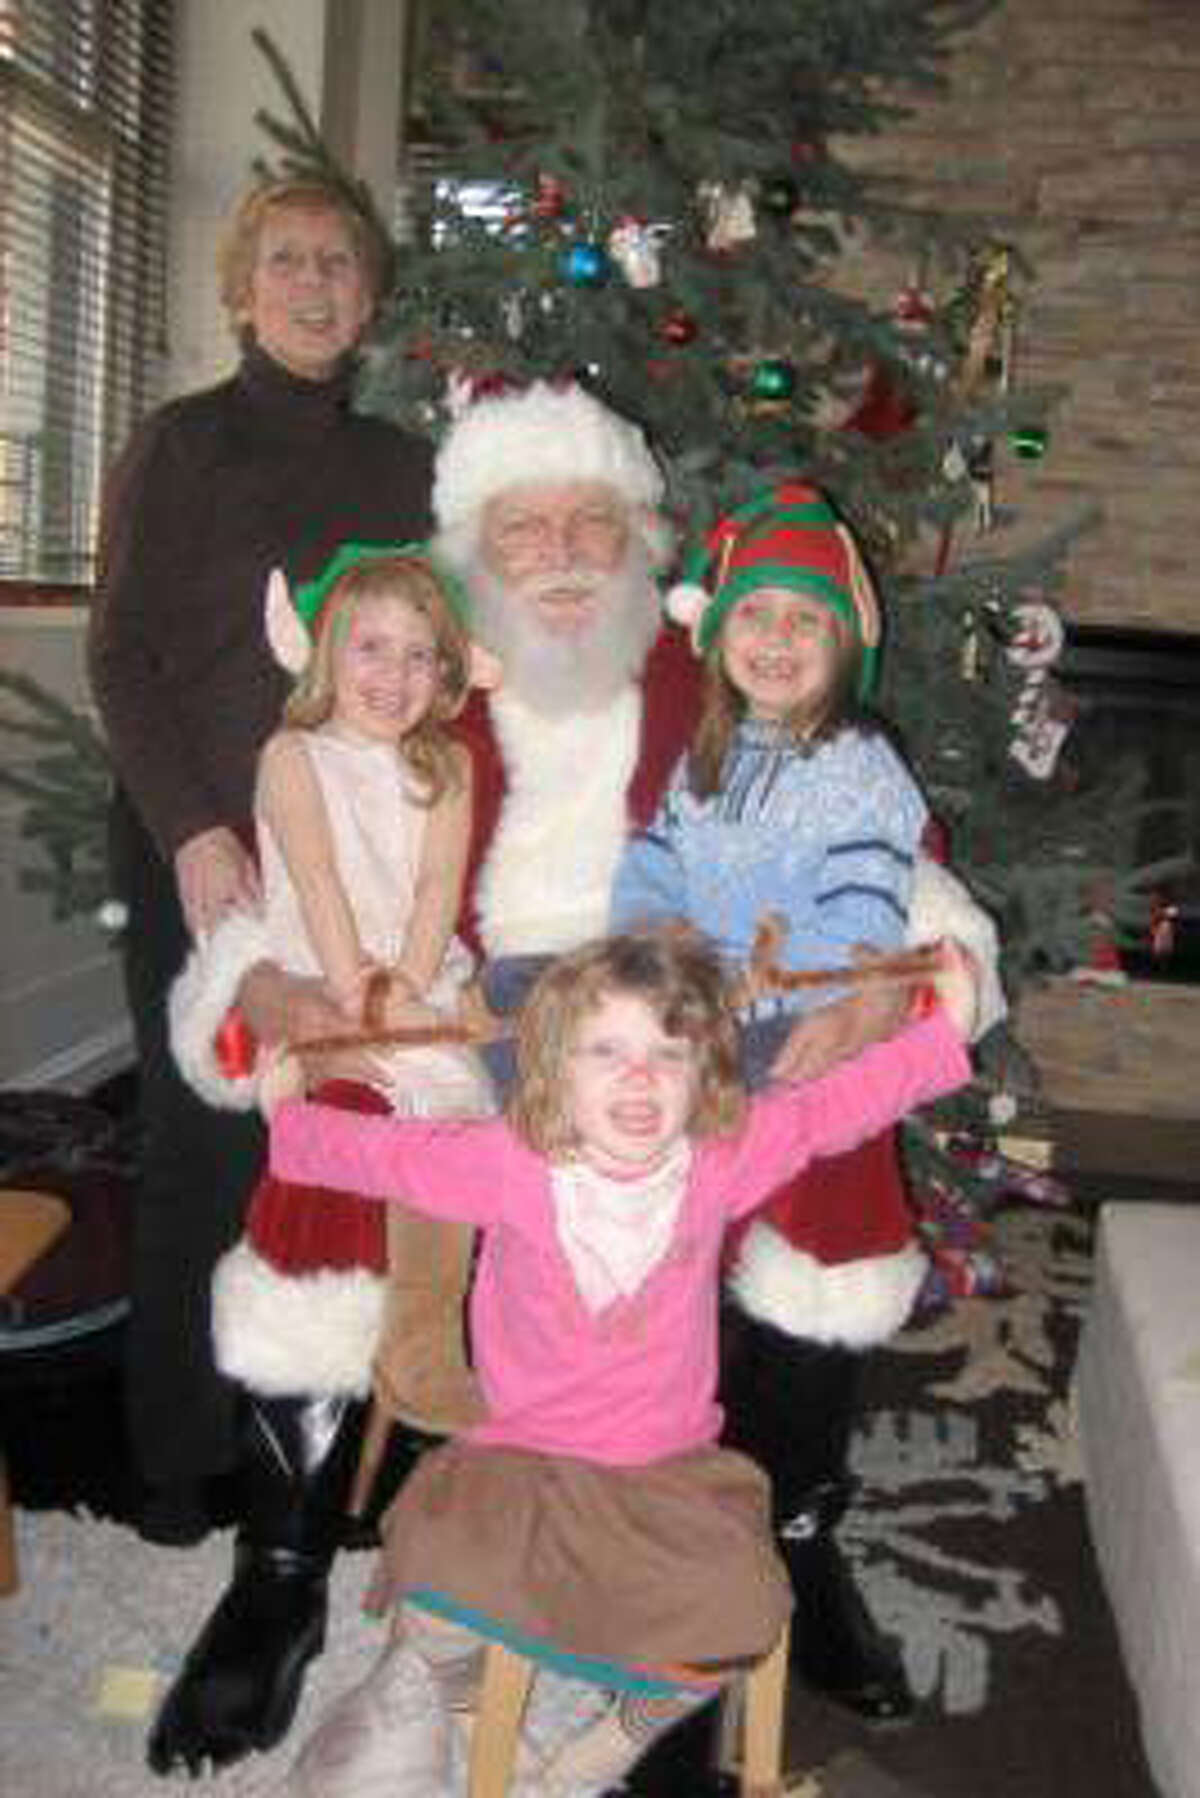 Courtesy of the Johnson family A photograph taken from the Web site gigmasters.com showing the five victims from the Christmas morning fire at Madonna Badger's home : Lomer Johnson, dressed as Santa; his wife, Pauline; and their granddaughters, Sarah, Grace, and Lily Badger, left to right.